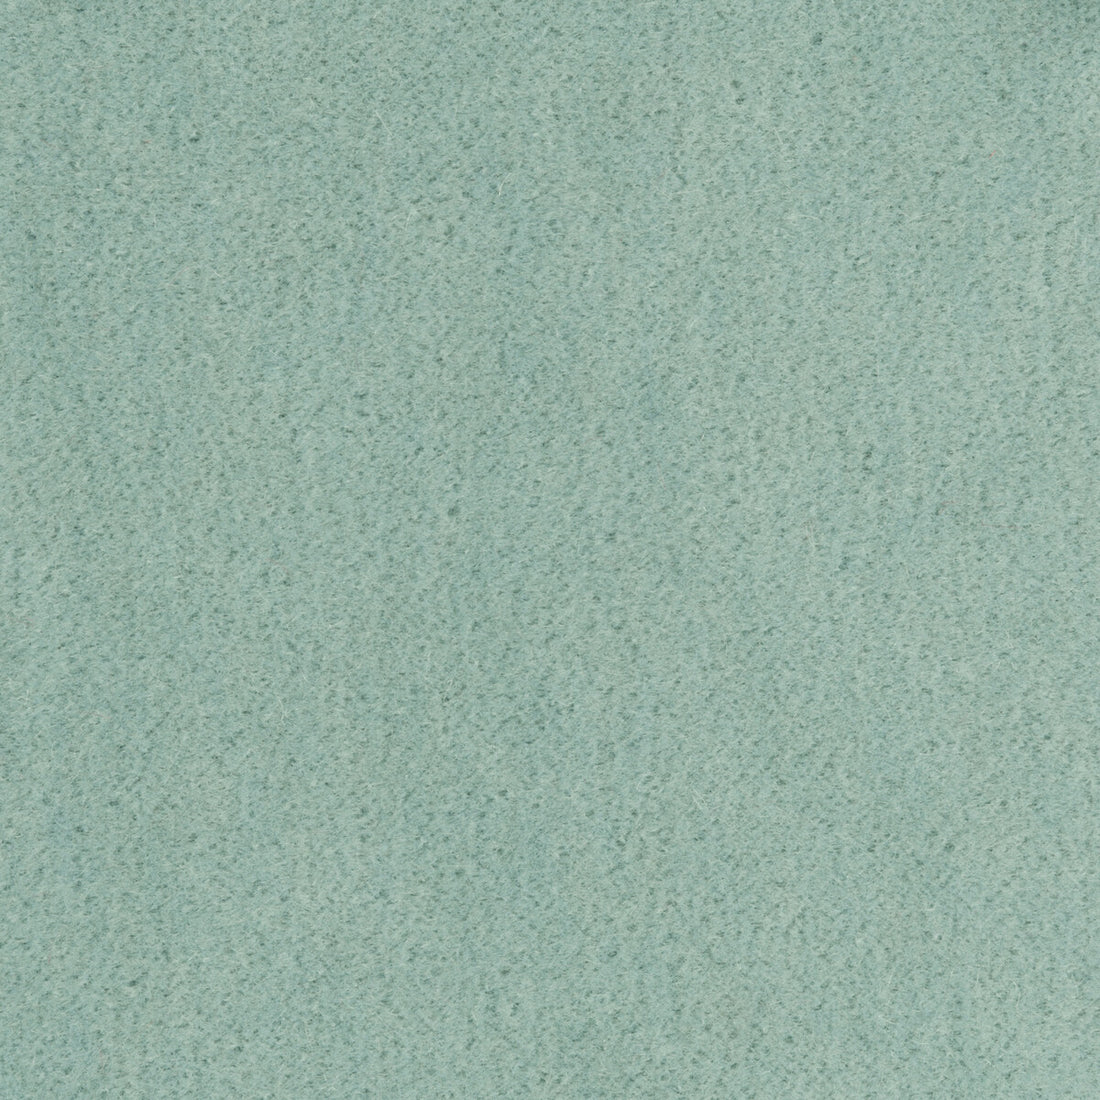 Bachelor Mohair fabric in aqua color - pattern 8014101.15.0 - by Brunschwig &amp; Fils